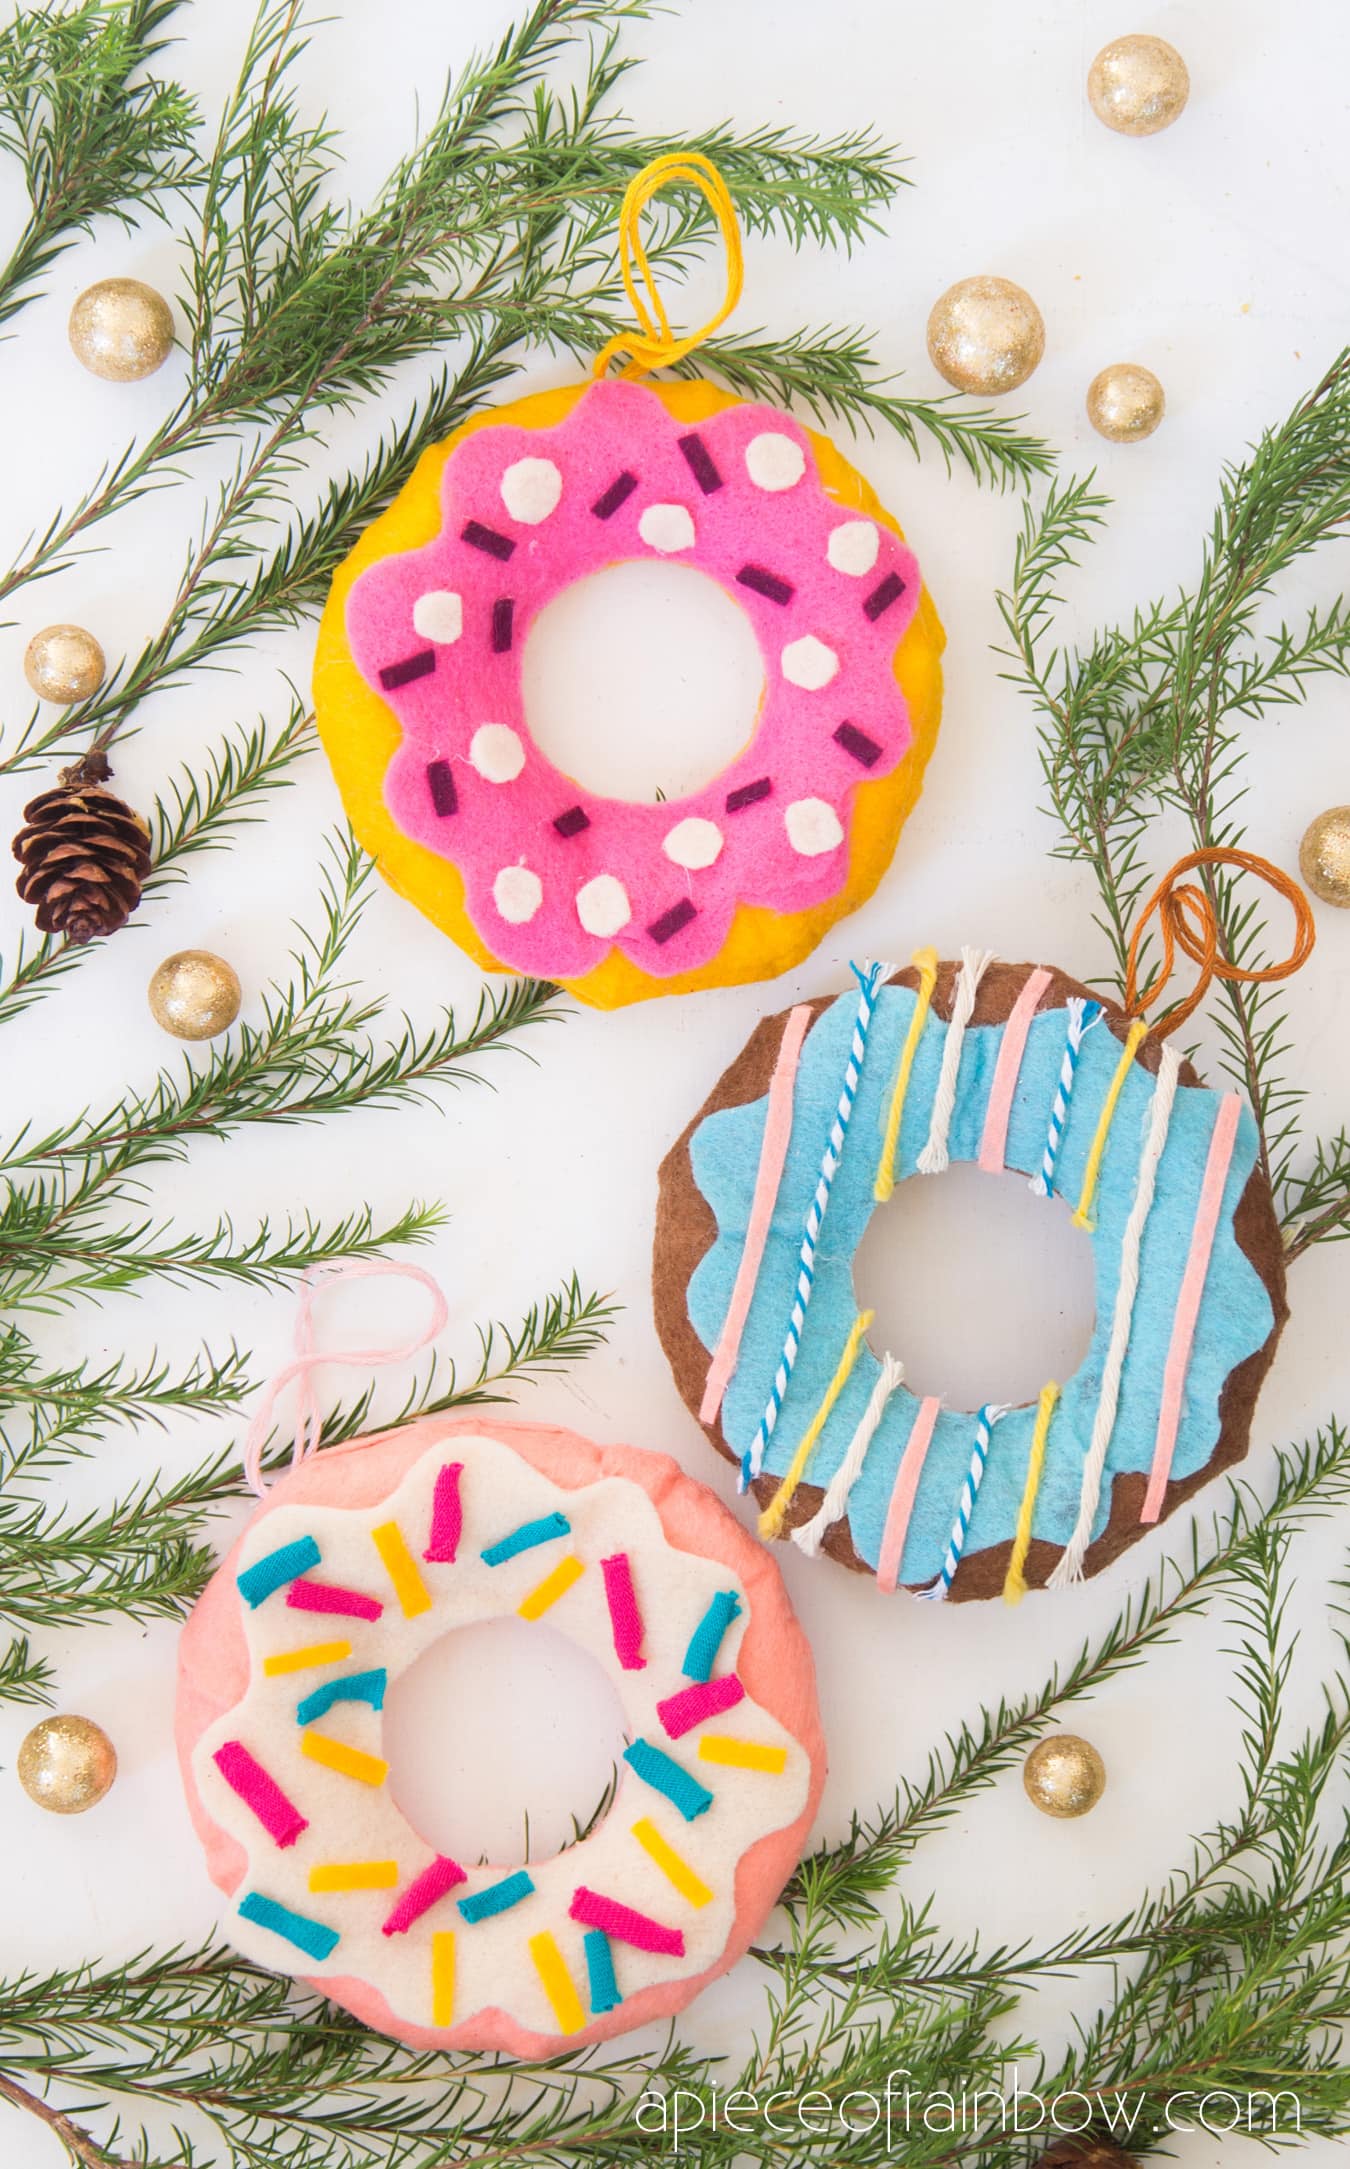 no-sew felt donut Christmas ornaments, fun crafts & easy DIY decorations in Anthropologie bohemian colorful style